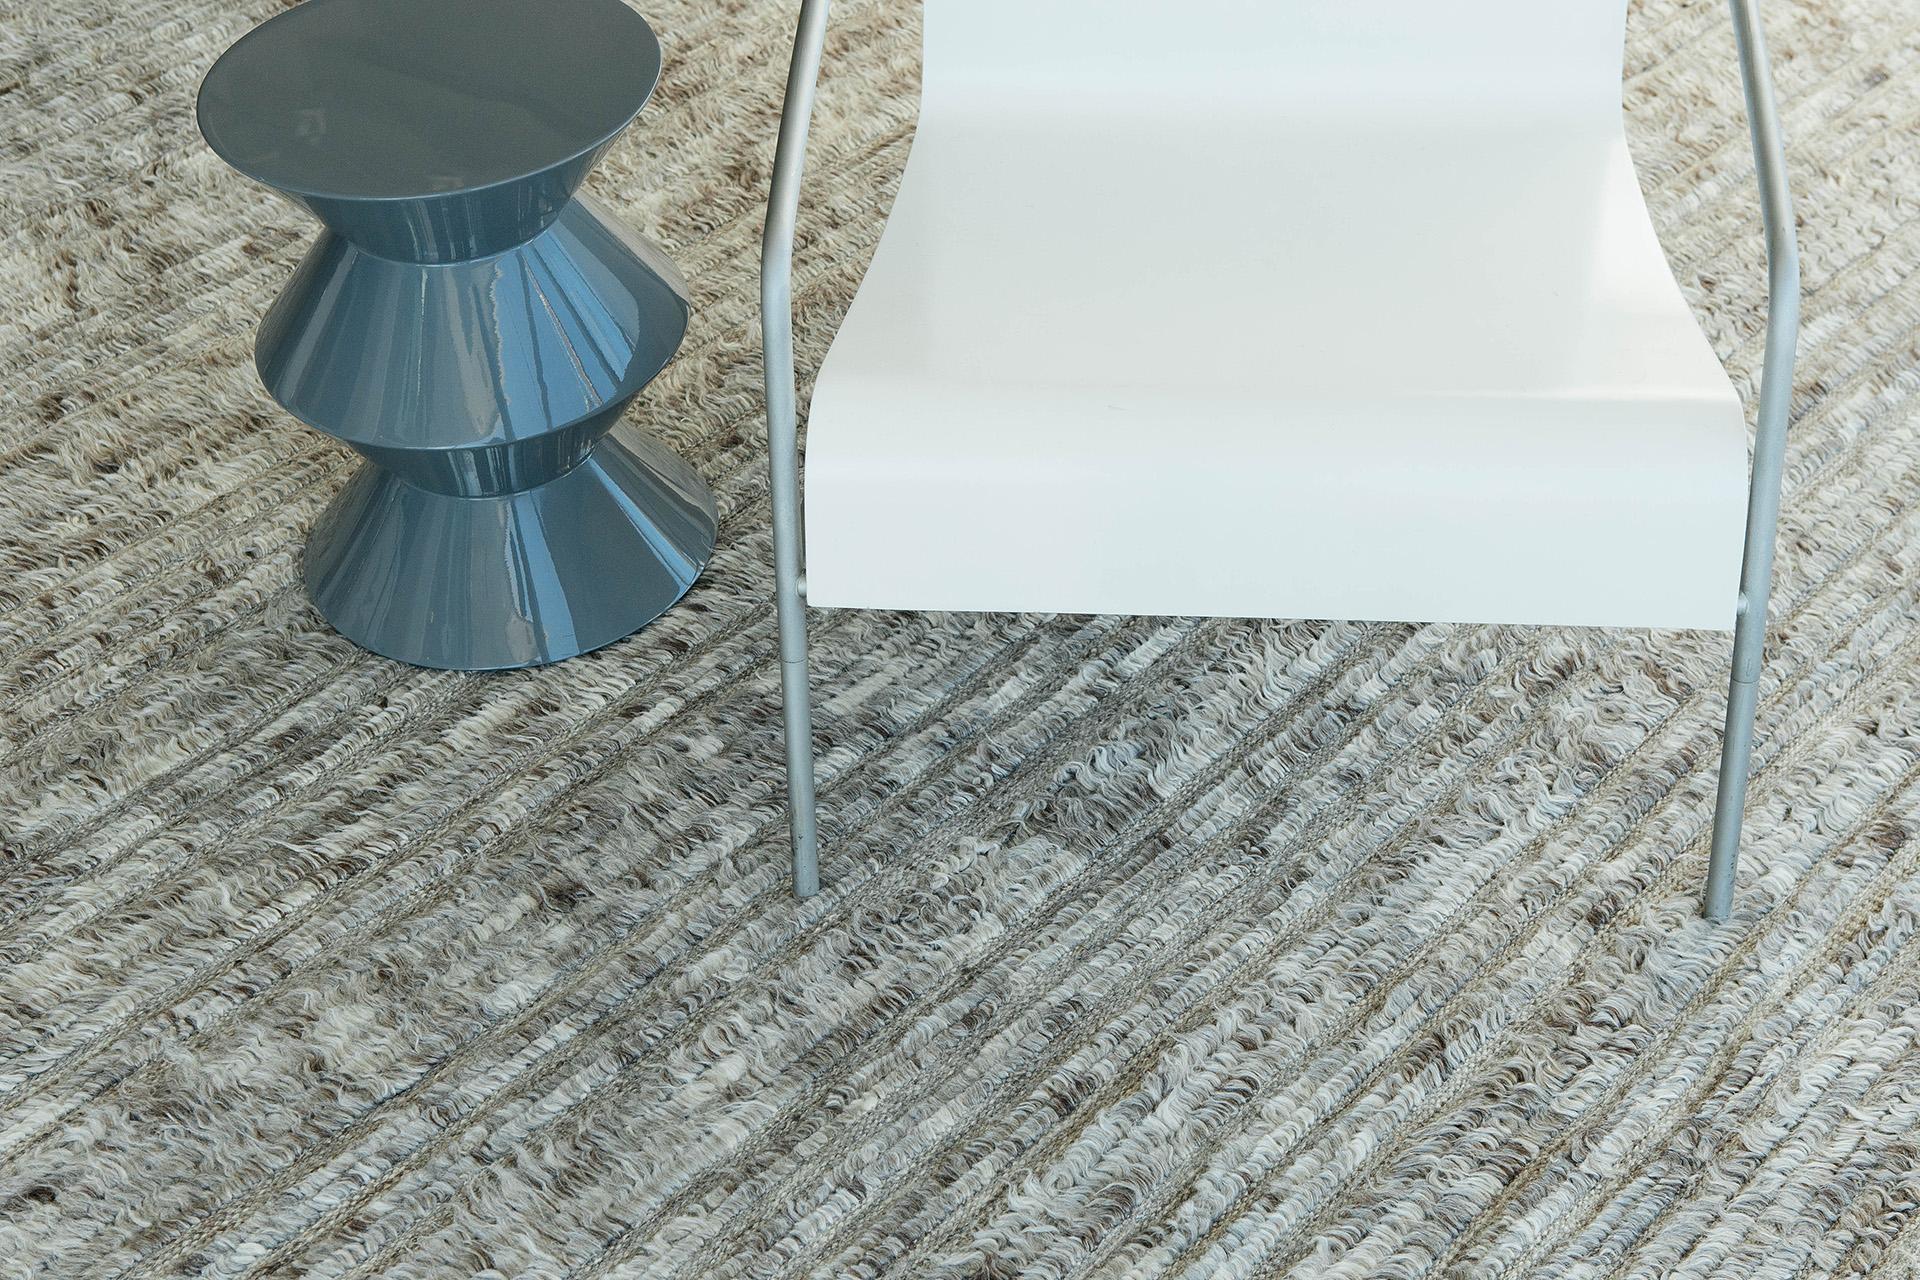 Kit Moresby' has become an LA staple. The signature rug of Malibu. Handwoven of luxurious wool, with timeless design elements and color palette. This Mehraban design is a contemporary interpretation of an Azilal, a part of our Atlas collection.